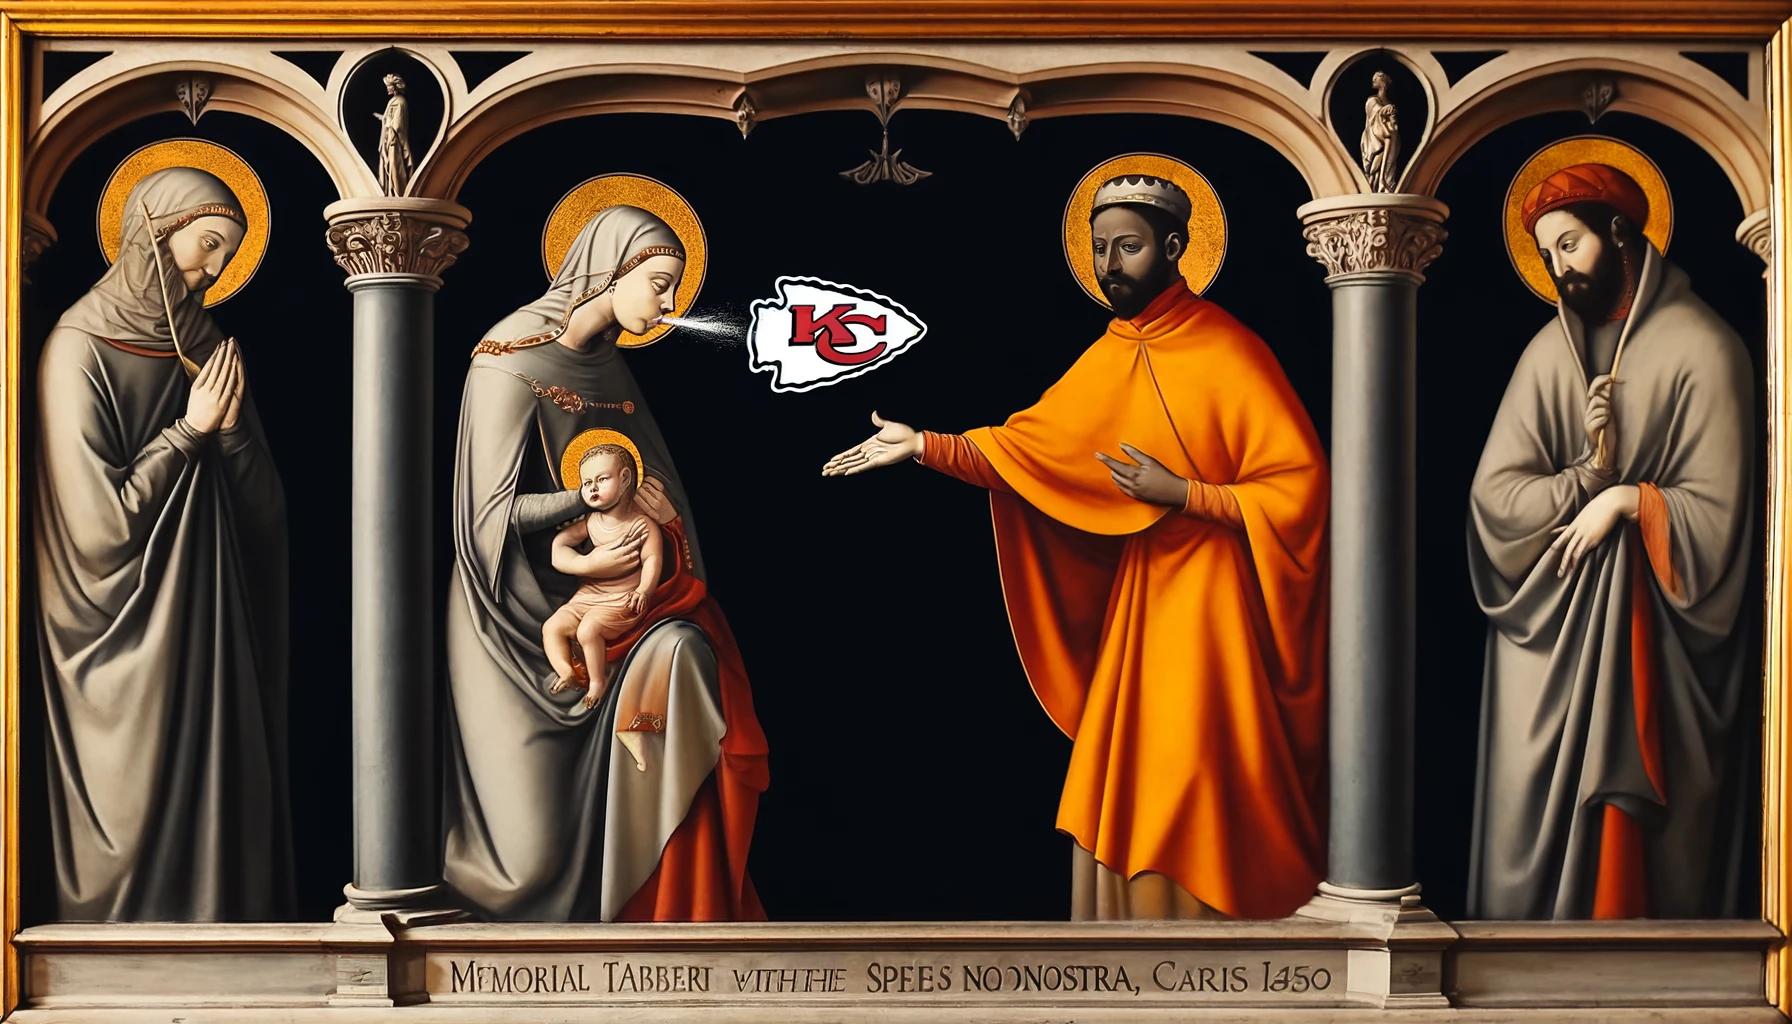 A recreation of the 'Memorial Tablet With the Visitation' by Master of the Spes Nostra, circa 1500. Instead of Mary, the figure on the left is holding a Kansas City Chiefs arrowhead logo and spitting on it. The setting remains medieval, with intricate details and a reverent atmosphere, while the figure's actions introduce a contemporary twist. The background features classical architectural elements and the other figure remains in traditional attire, adding to the historical contrast.